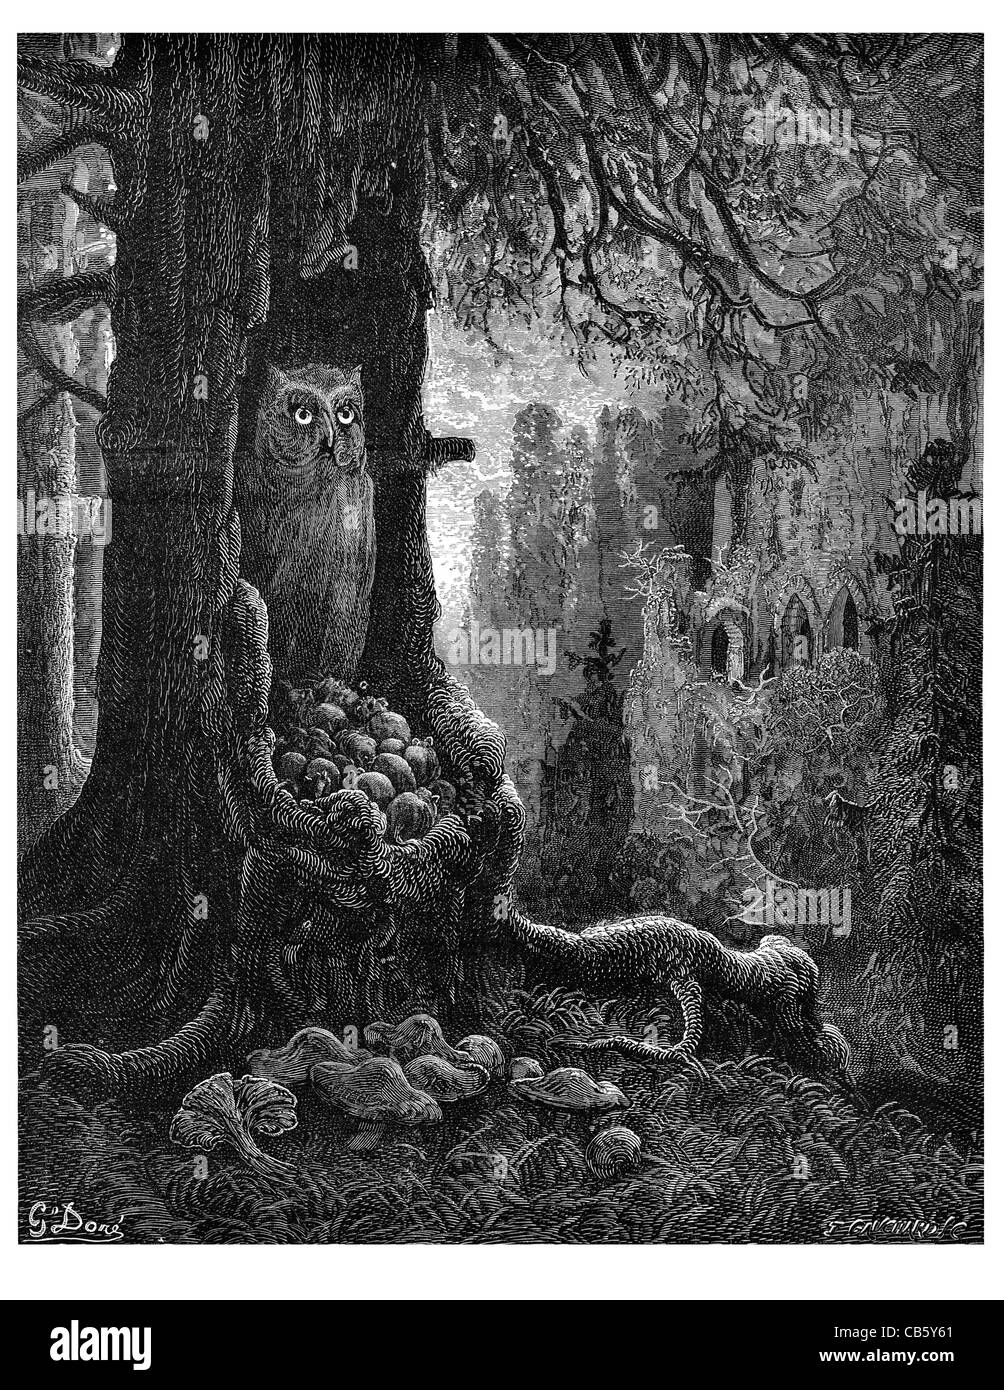 mice and the cat-haunt owl nest tree trunk forest woods ruins ruin dark night rat rodent mouse mushroom wild wildlife nature Stock Photo